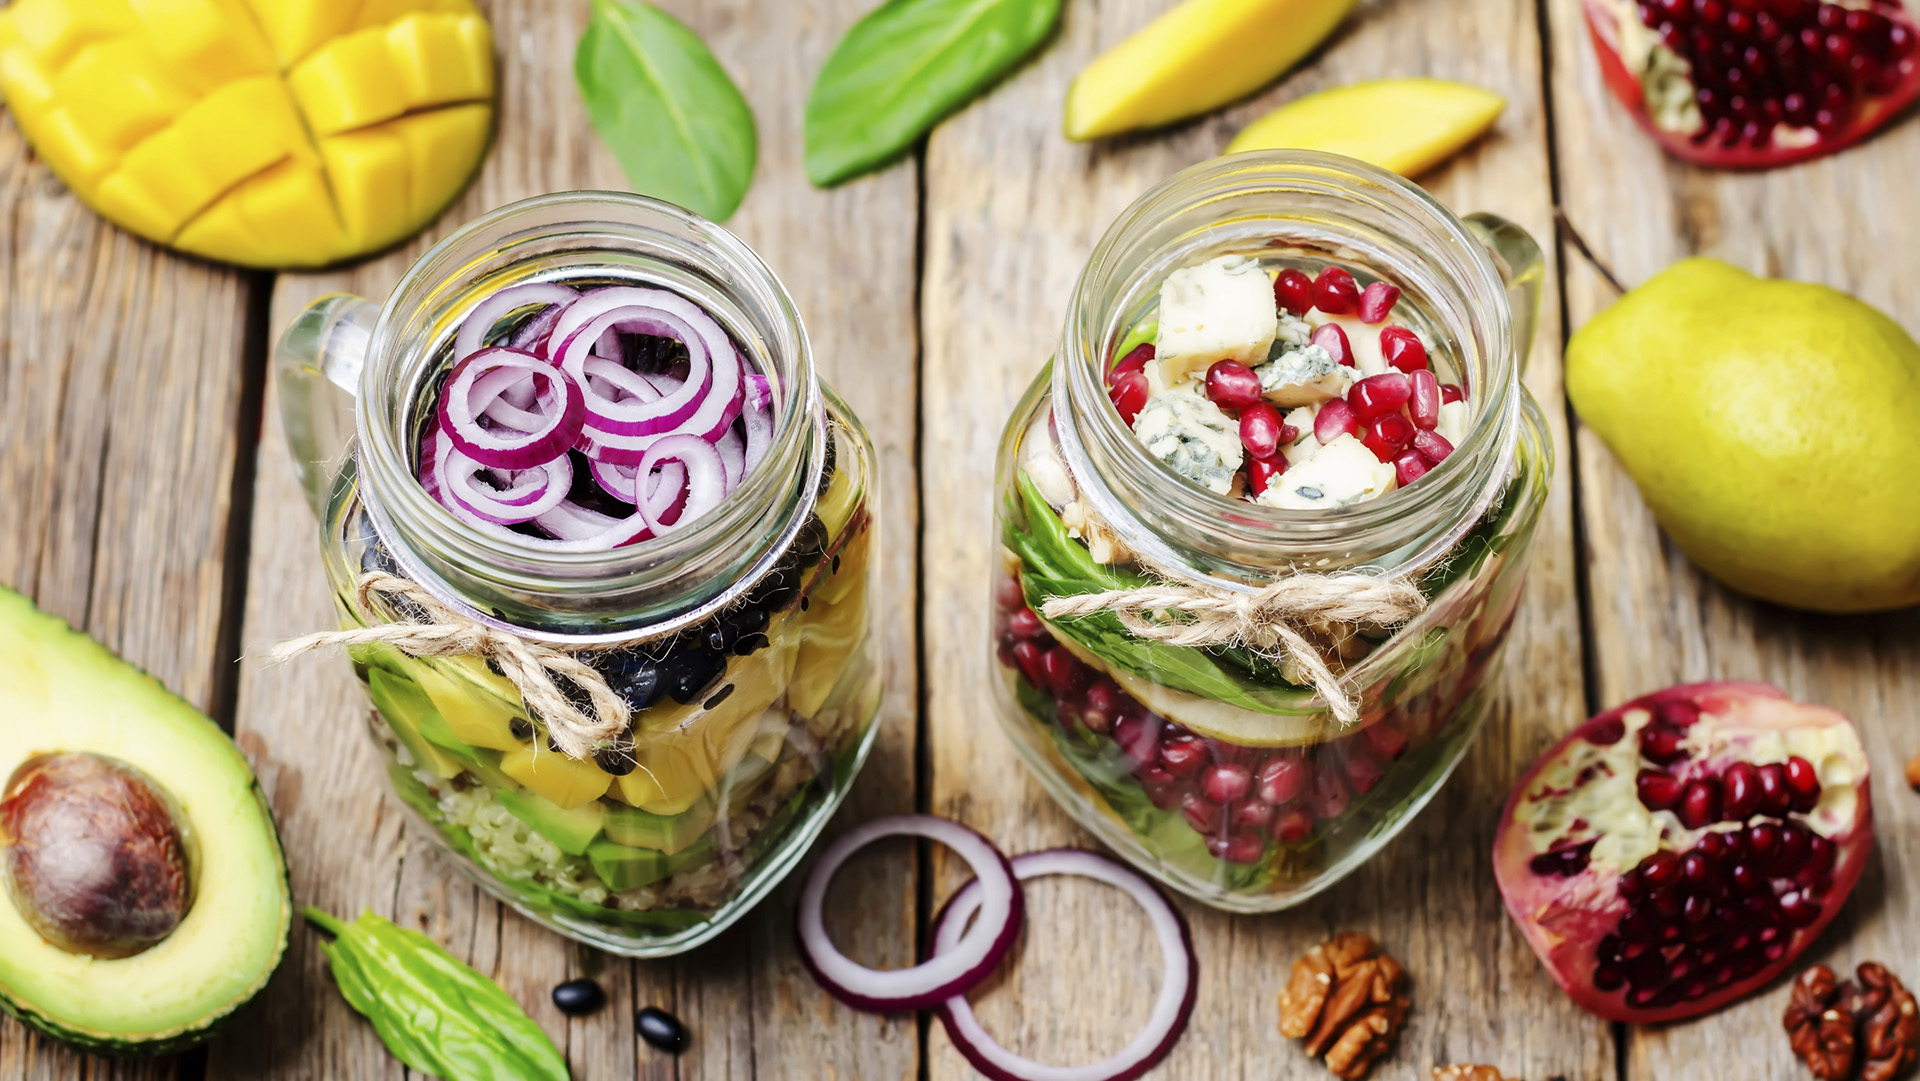 homemade healthy salads with vegetables, fruits, beans and quinoa in jar. toning. selective Focus